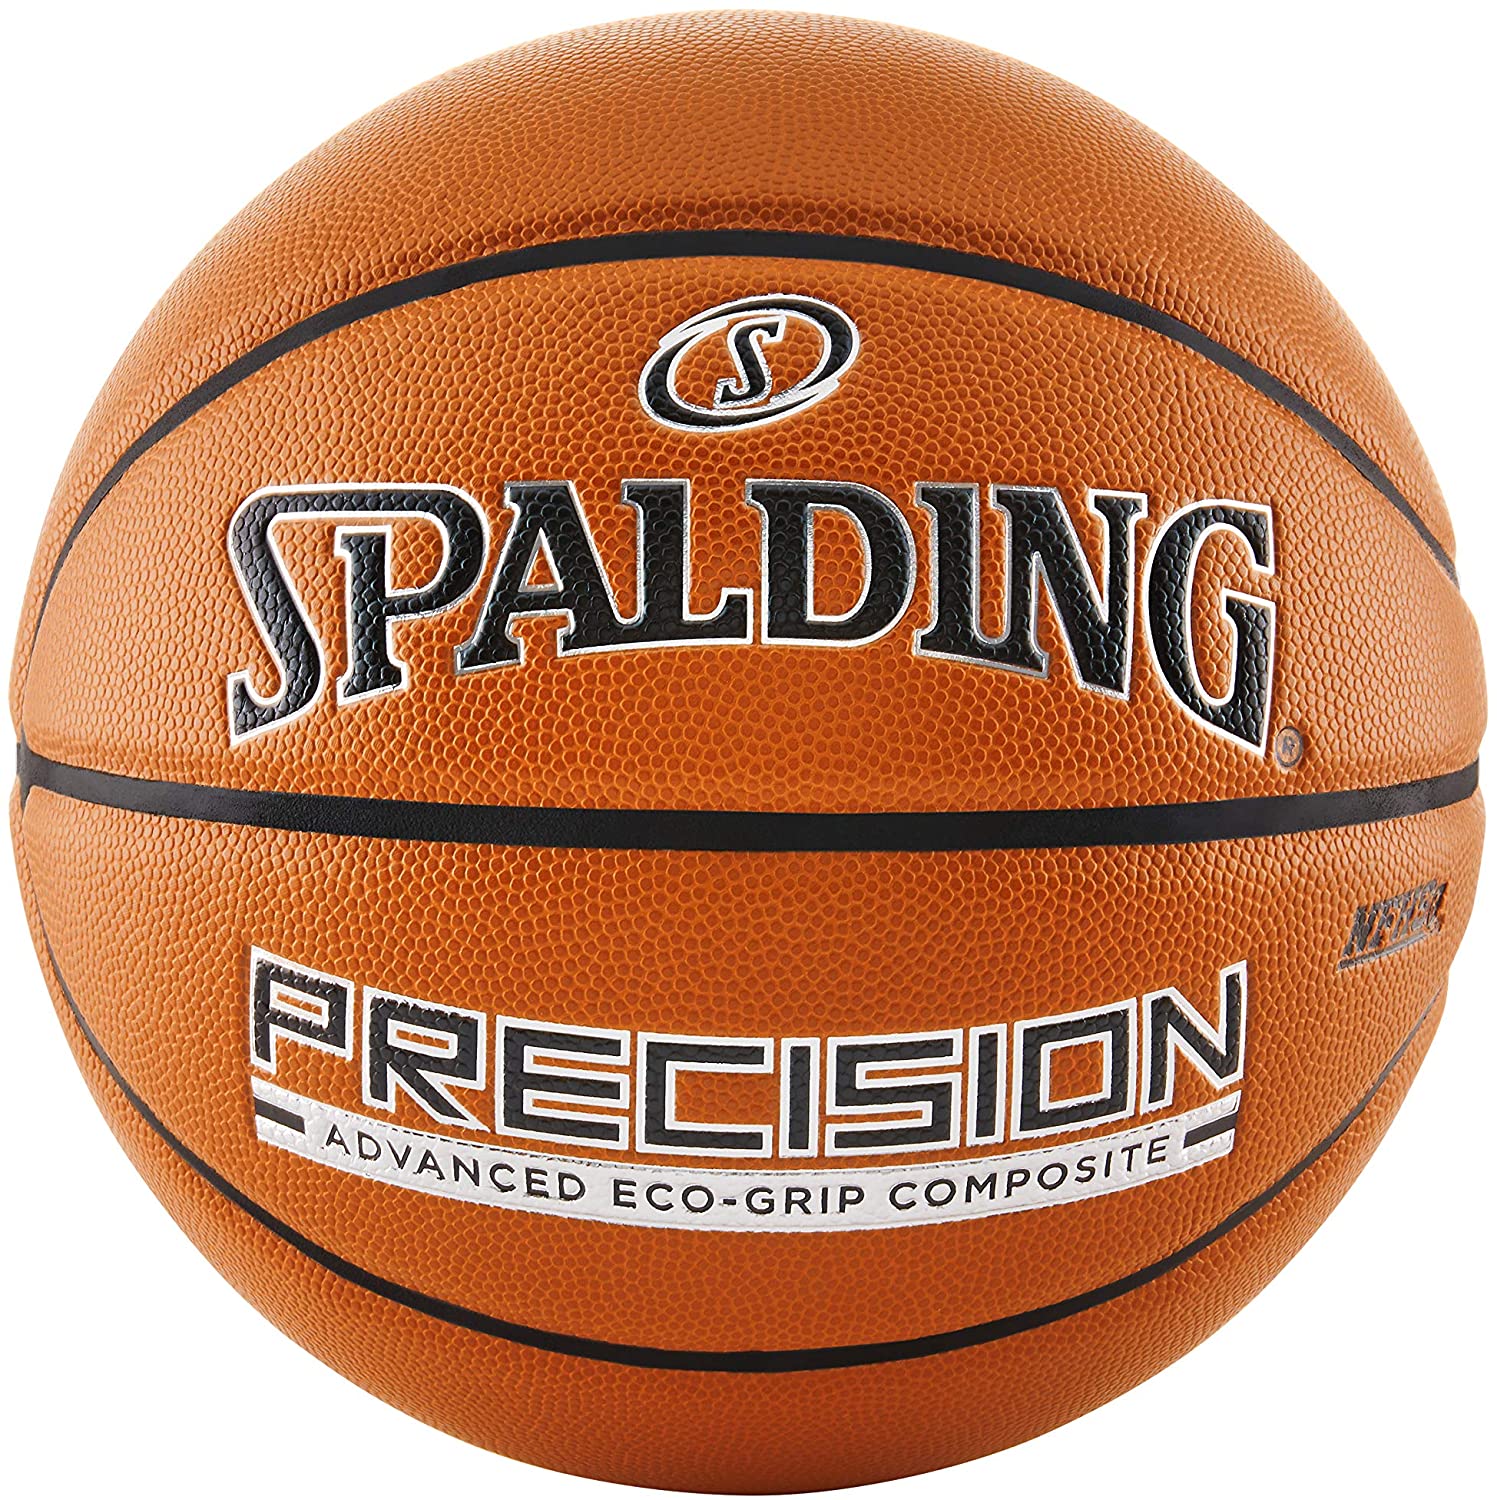 Spalding Precision TF-1000 Indoor Game Basketball Reviews